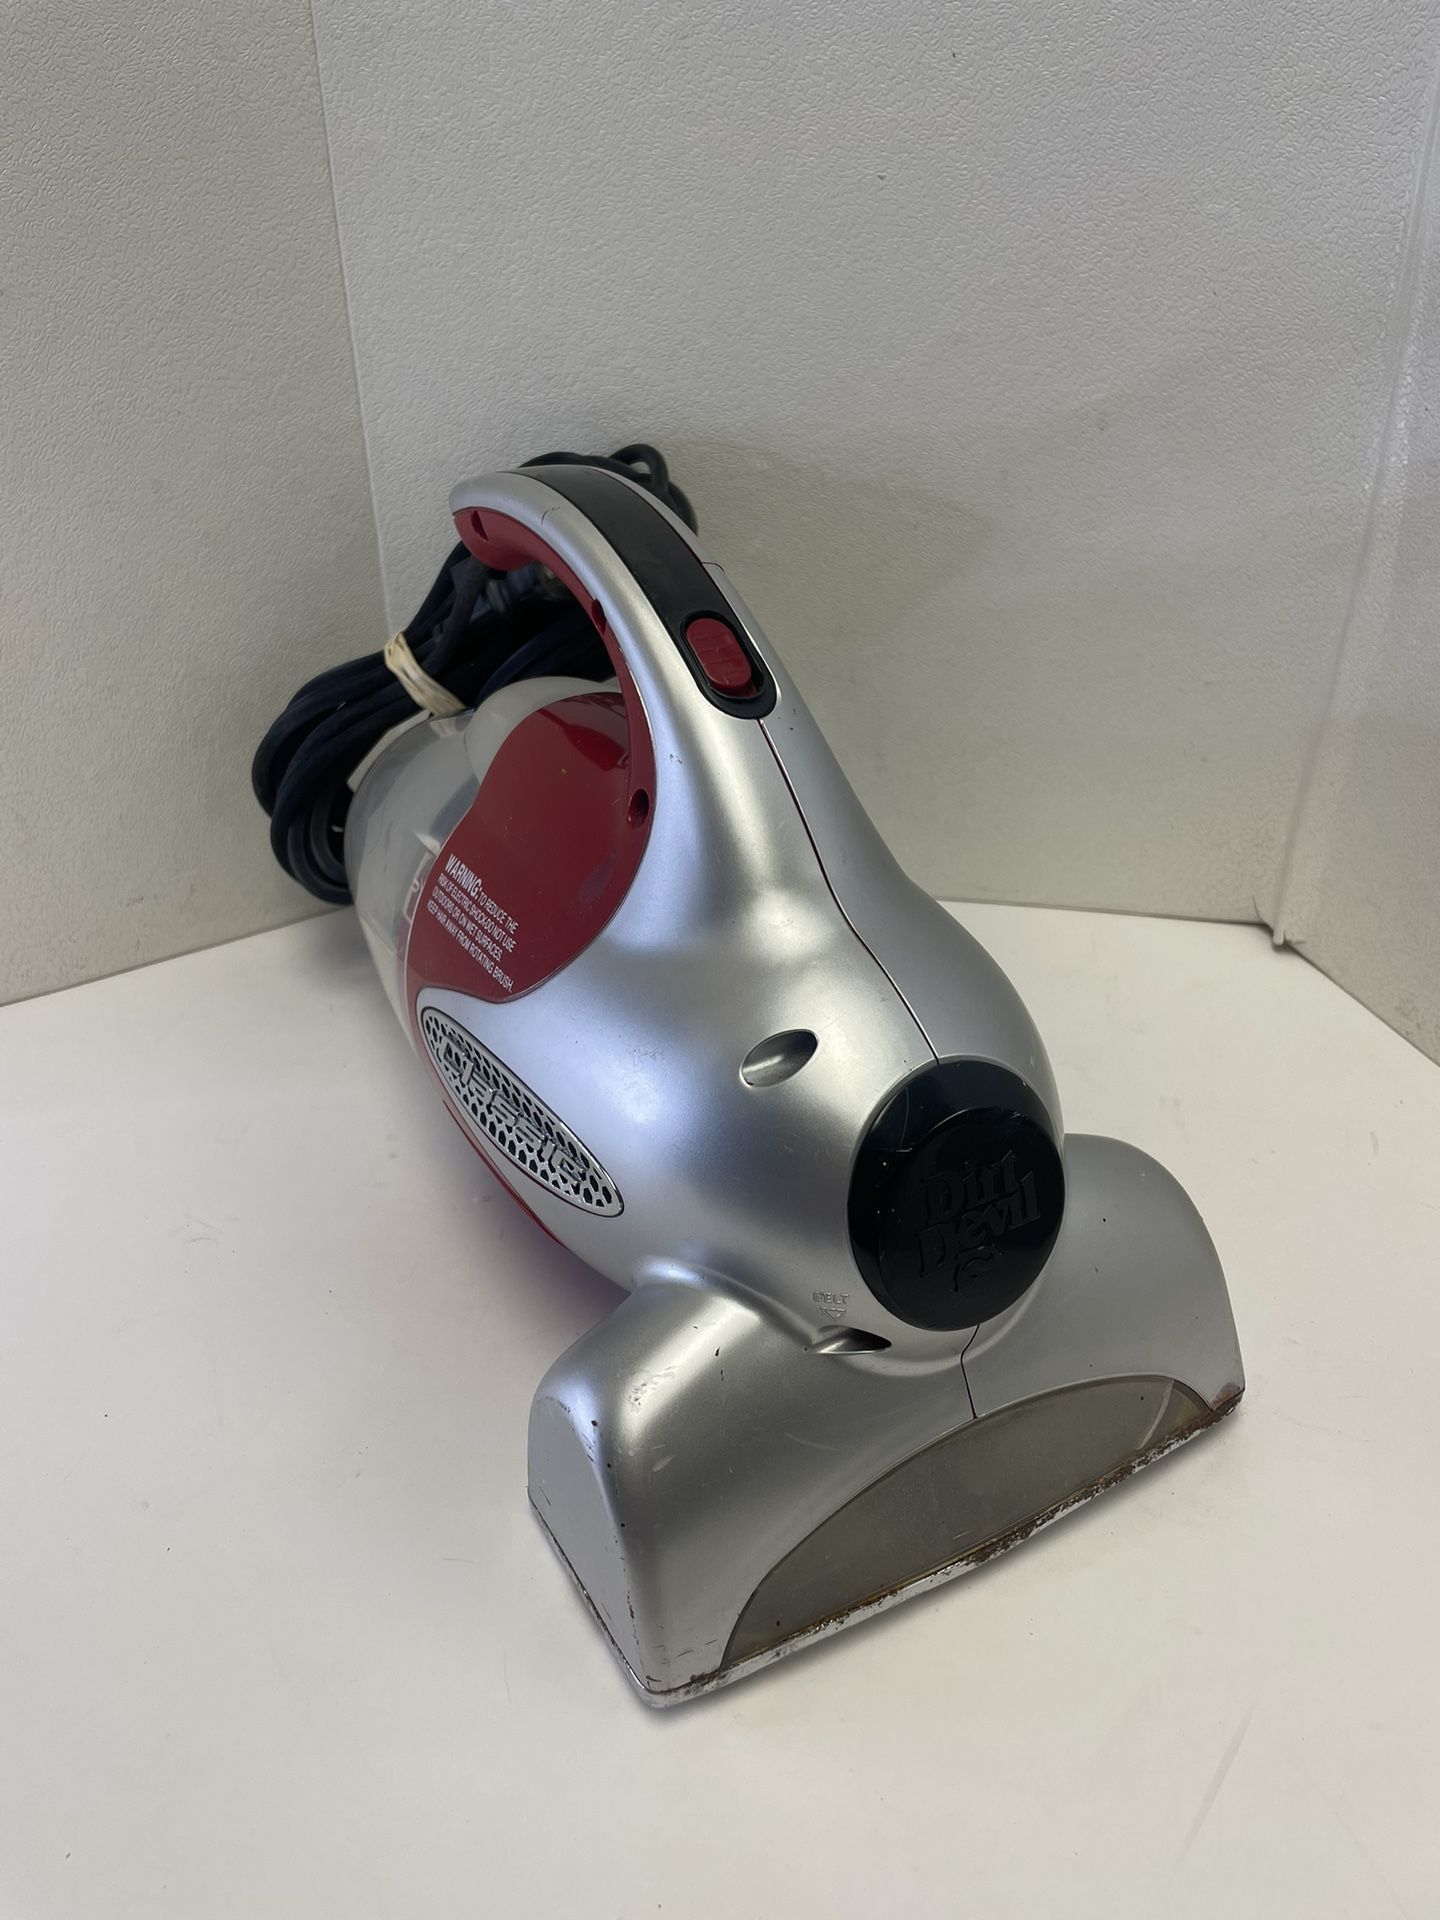 Royal Dirt Devil Hand Vacuum Corded Classic Cleaner Model 0100 Need Filter Works